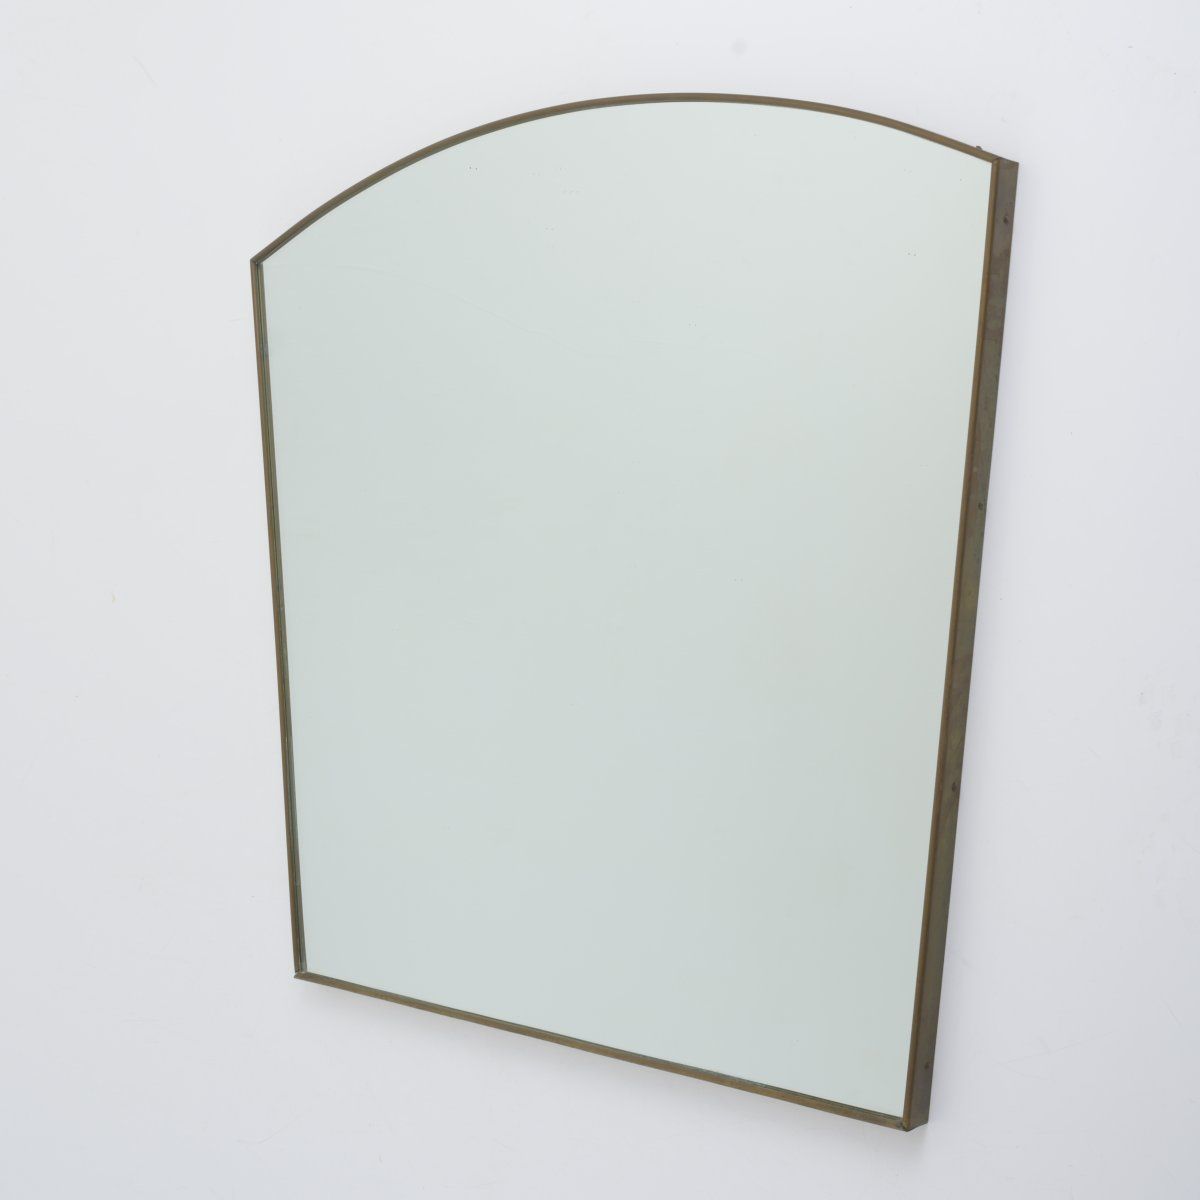 Null Italy, Large wall mirror, c. 1949, H. 85 x 95.5 x 3 cm. Sheet brass, wood, &hellip;